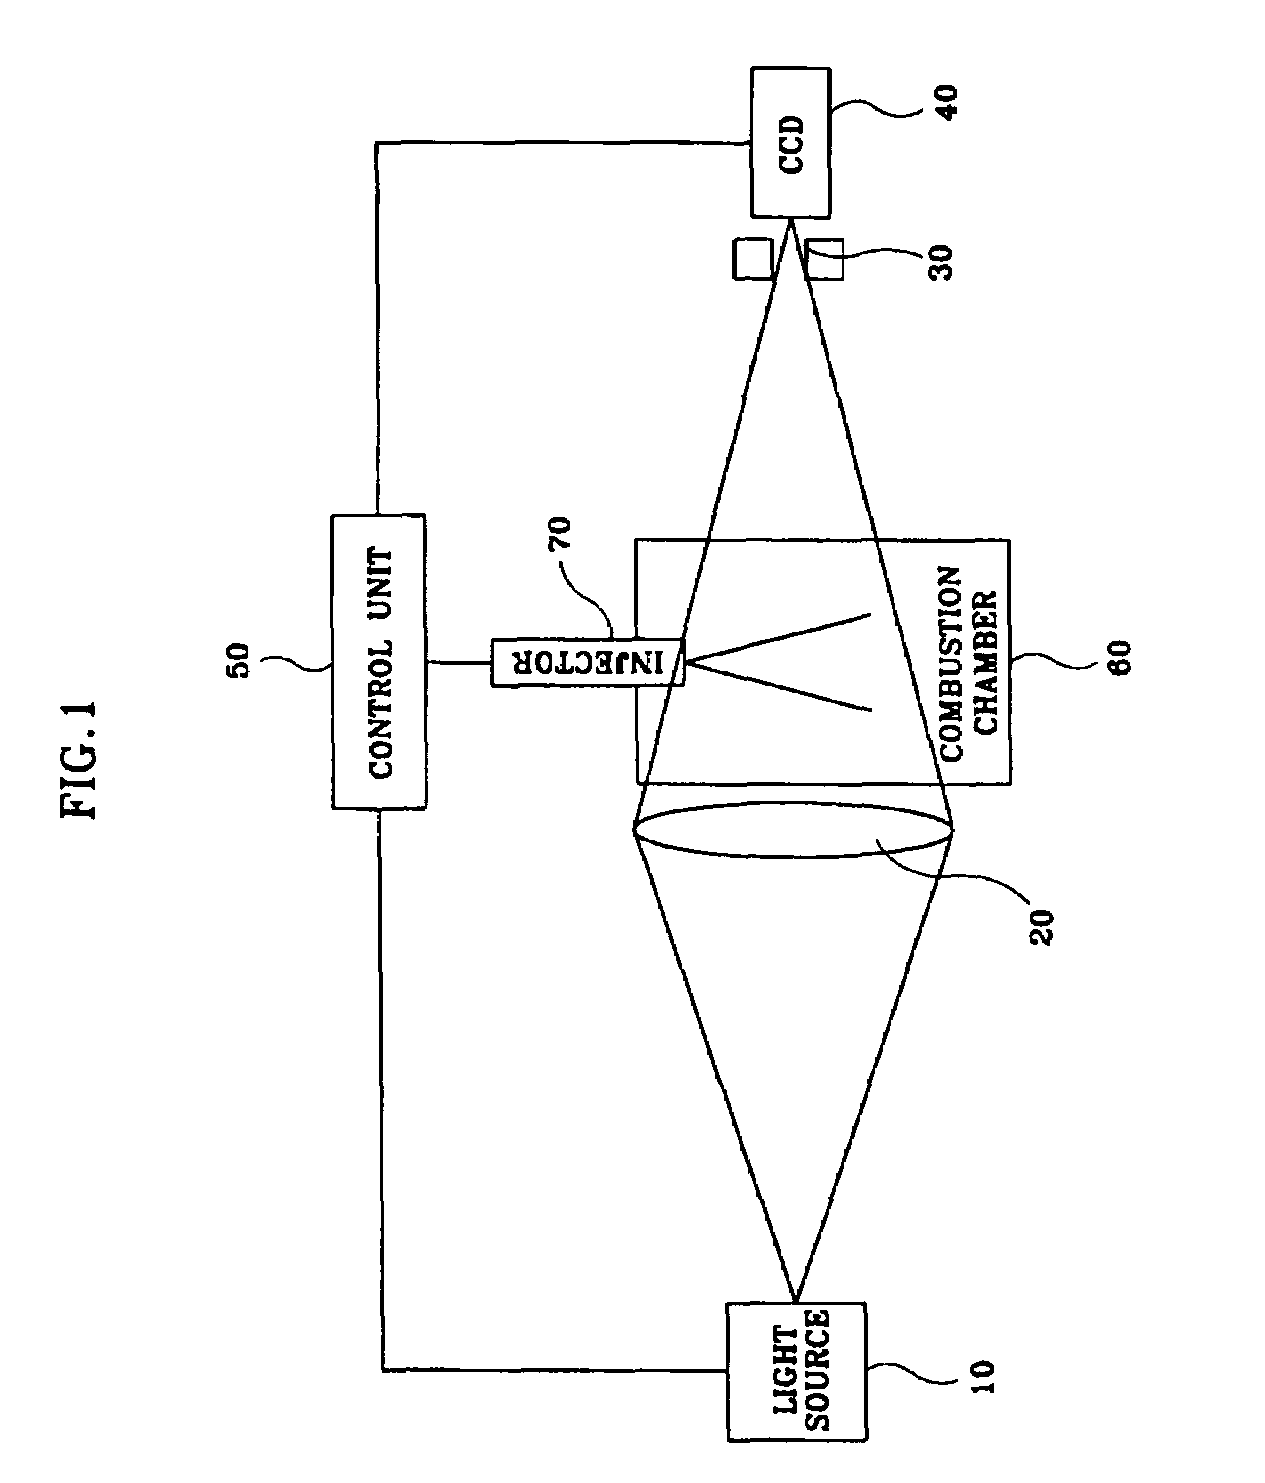 System and method for measuring tip velocity of sprayed fuel